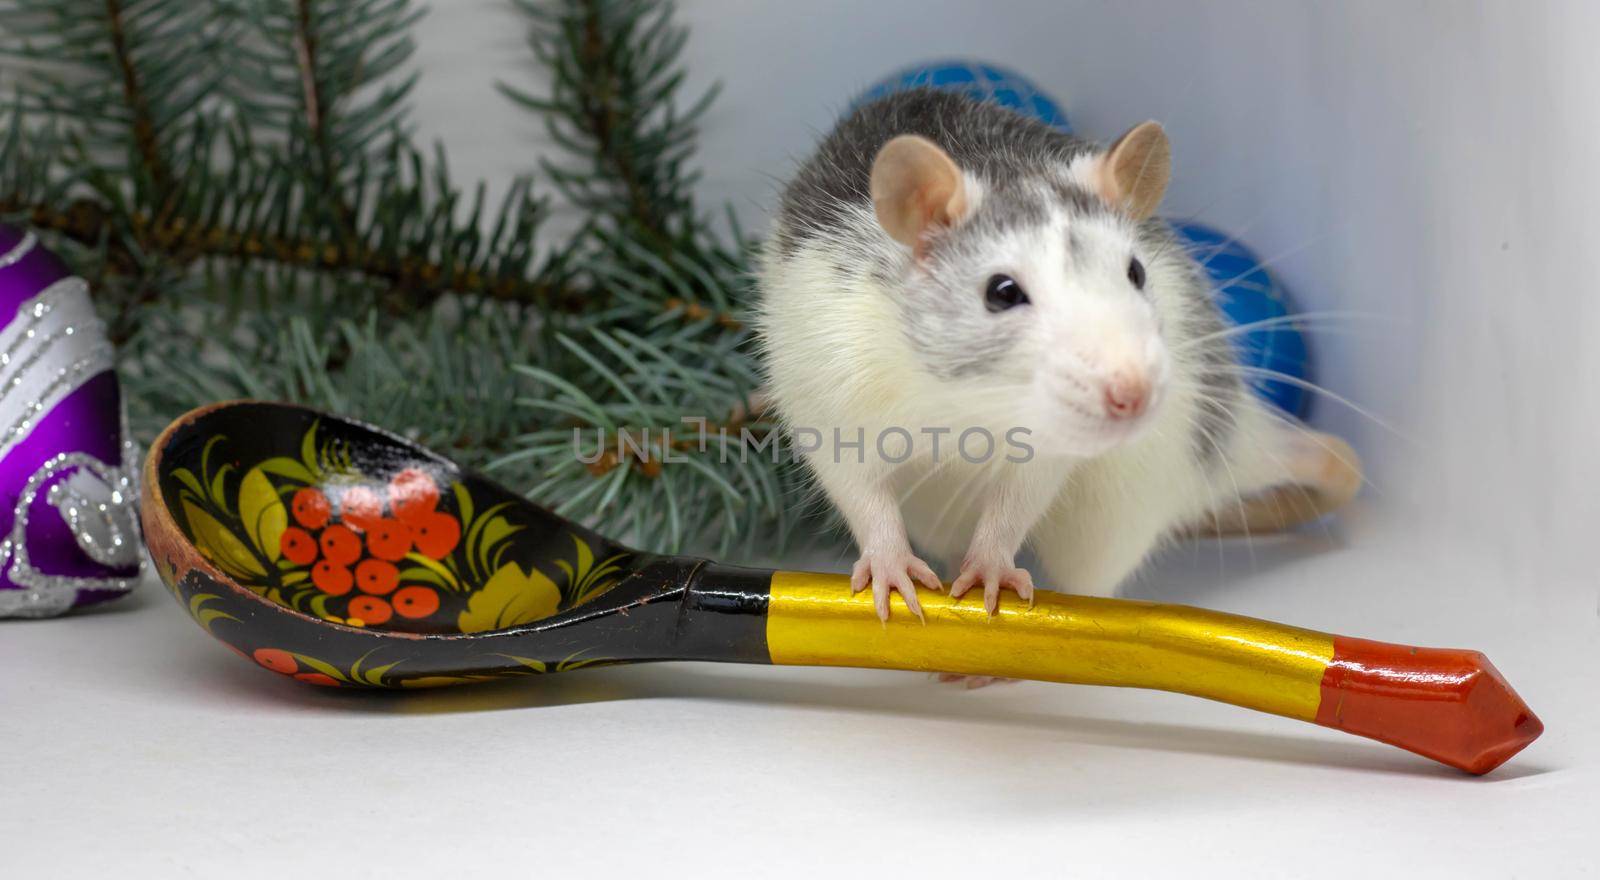 Cute silver rat sits around a large wooden spoon. Chinese New Year symbol 2020.Christmas holidays vintage decoration background.Concept 2020